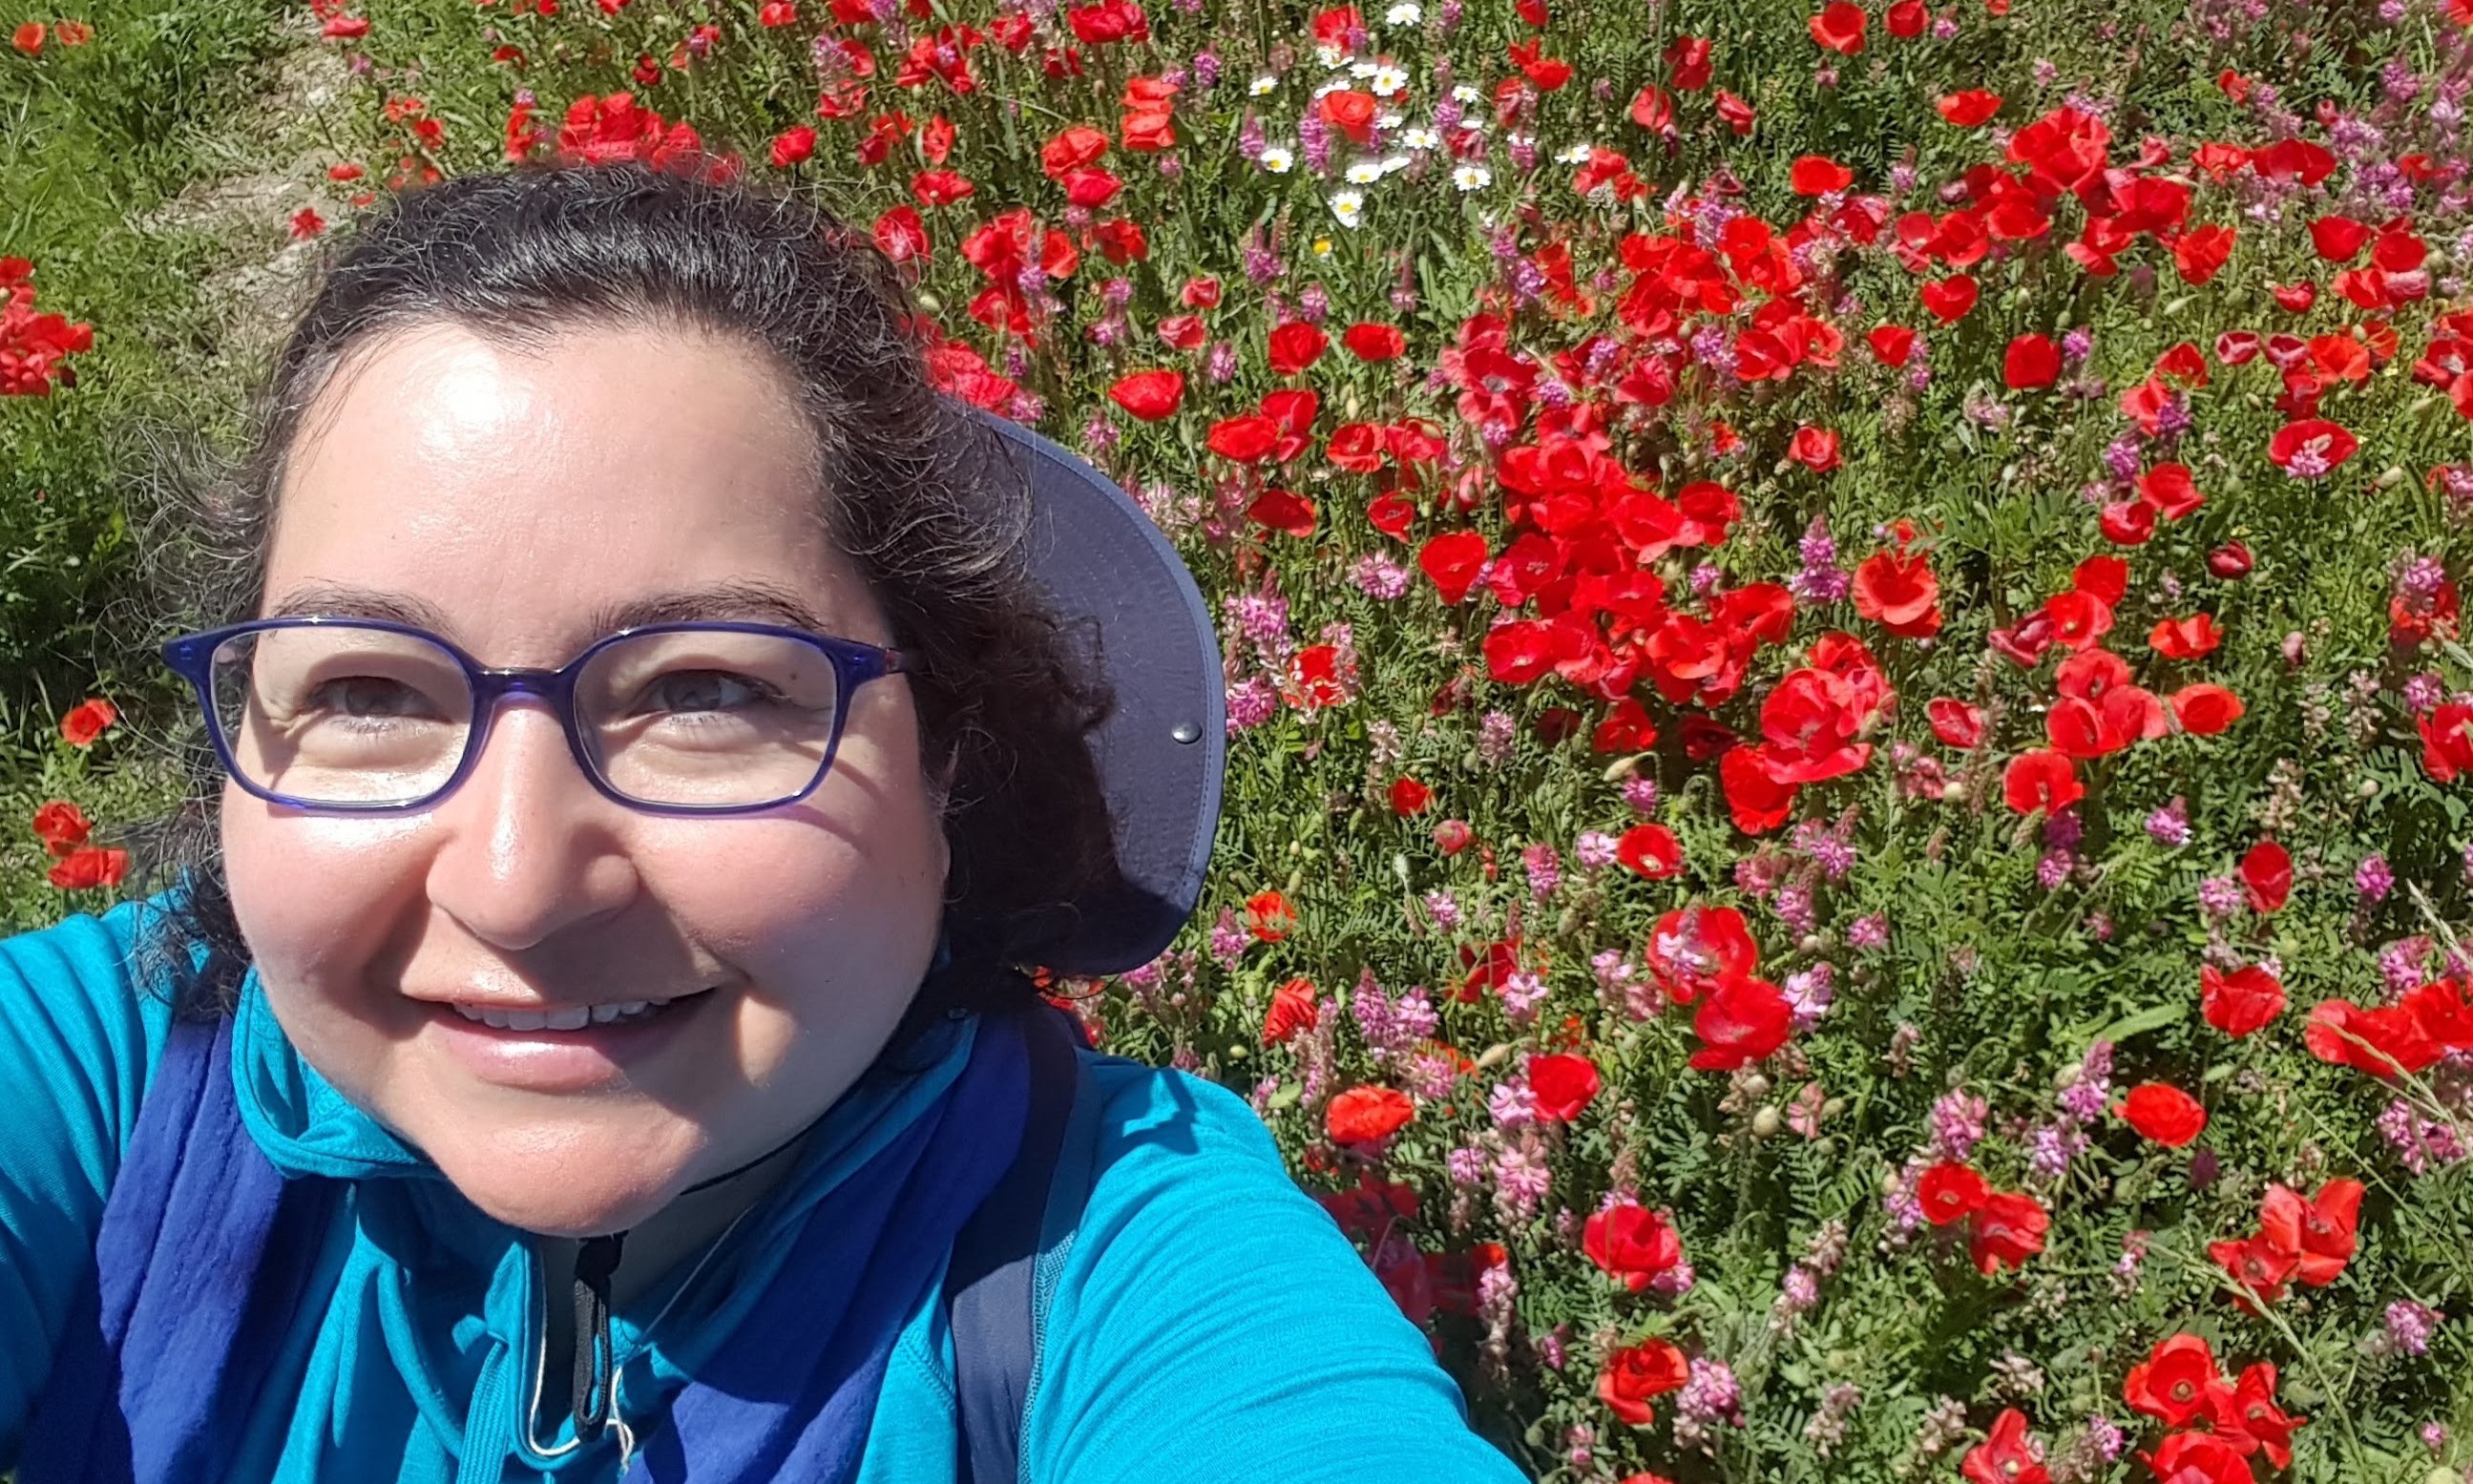 Help Irma with lodging expenses on the Camino de Santiago!